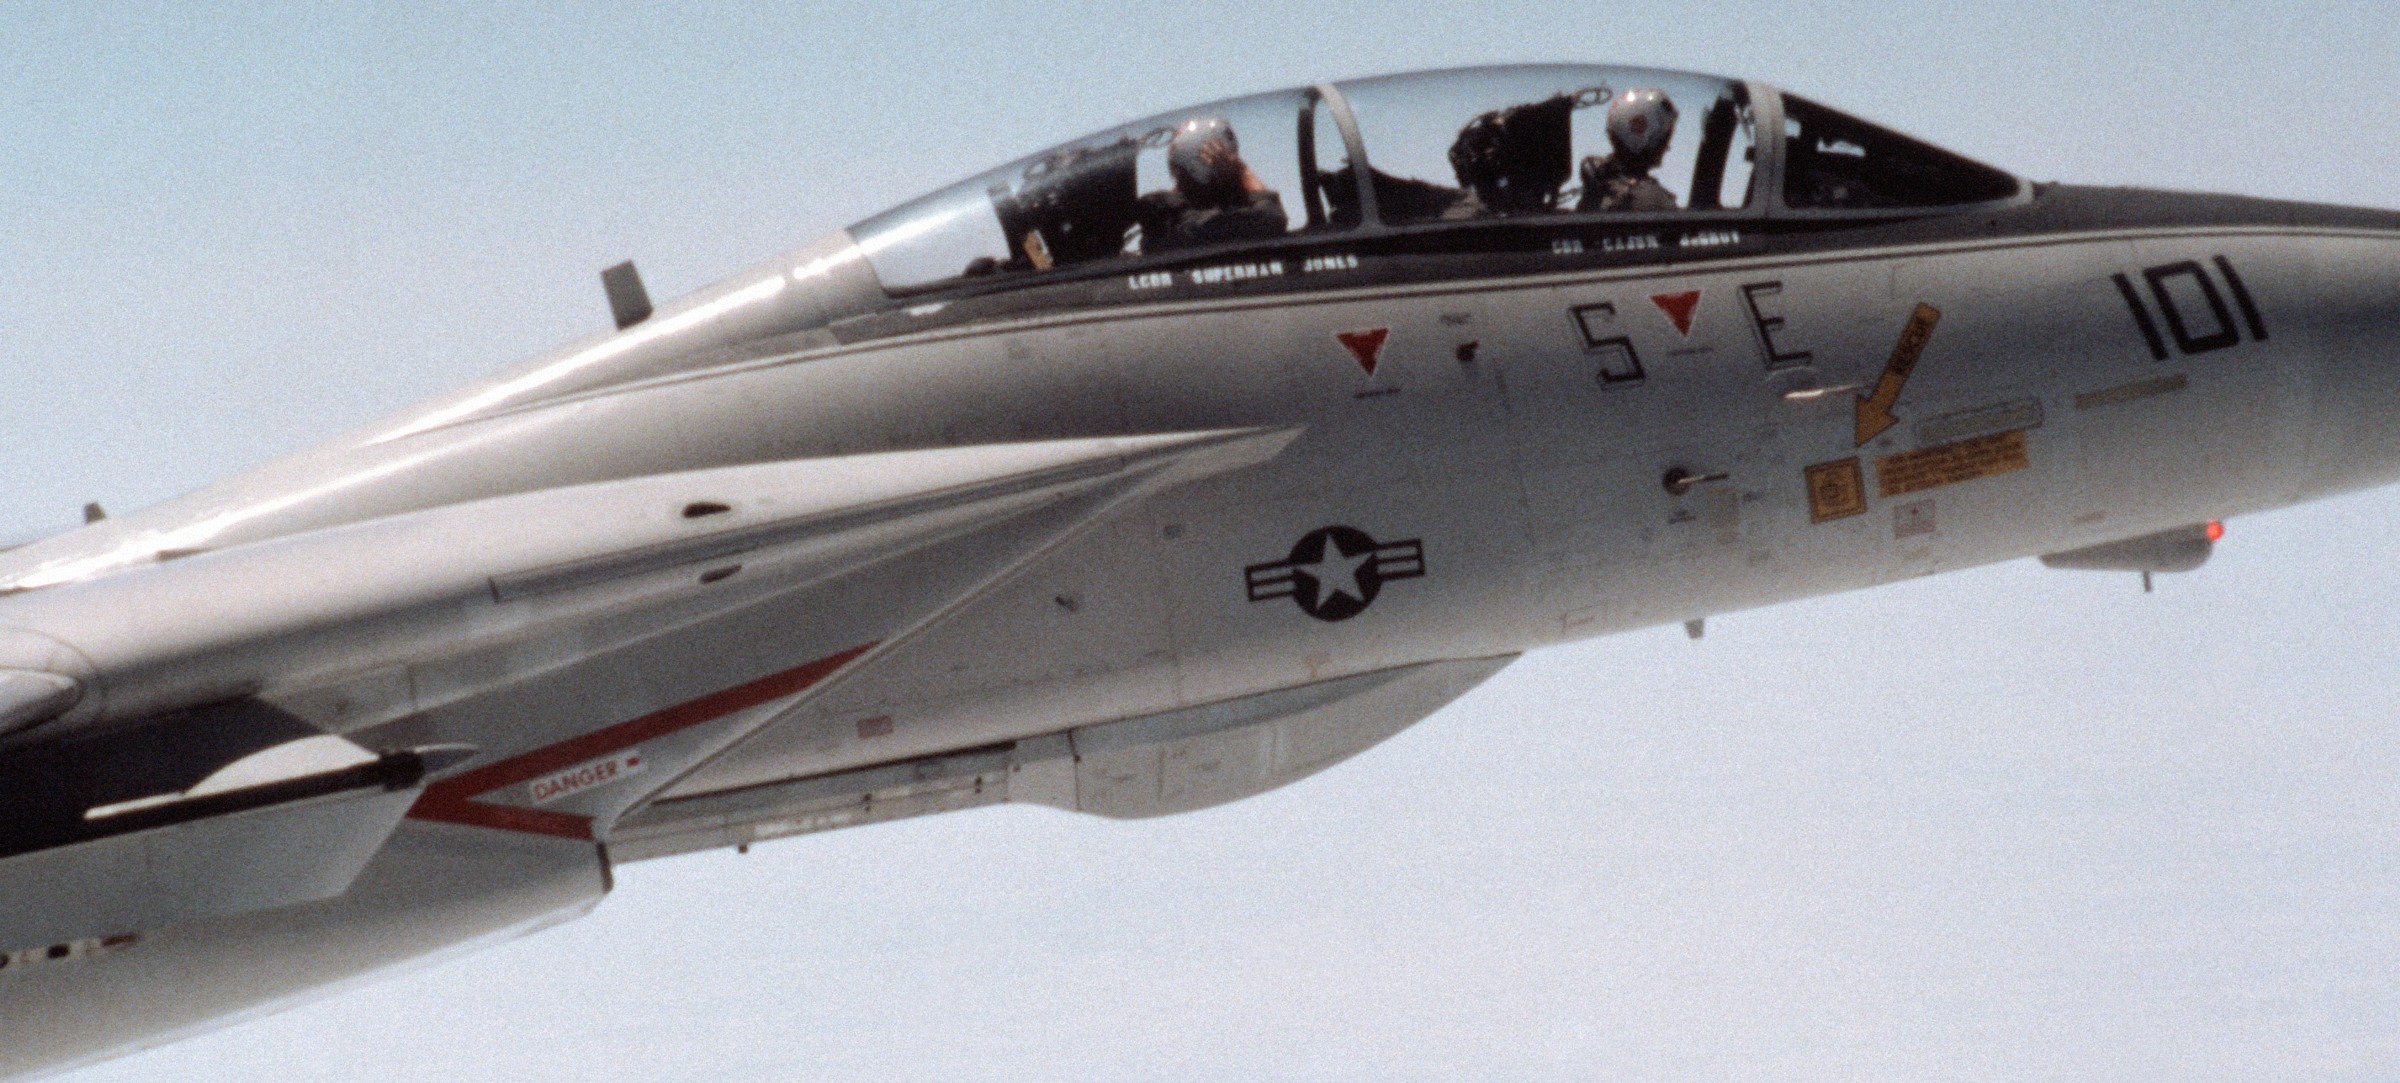 vf-211 fighting checkmates fighter squadron f-14a tomcat us navy carrier air wing san diego 92